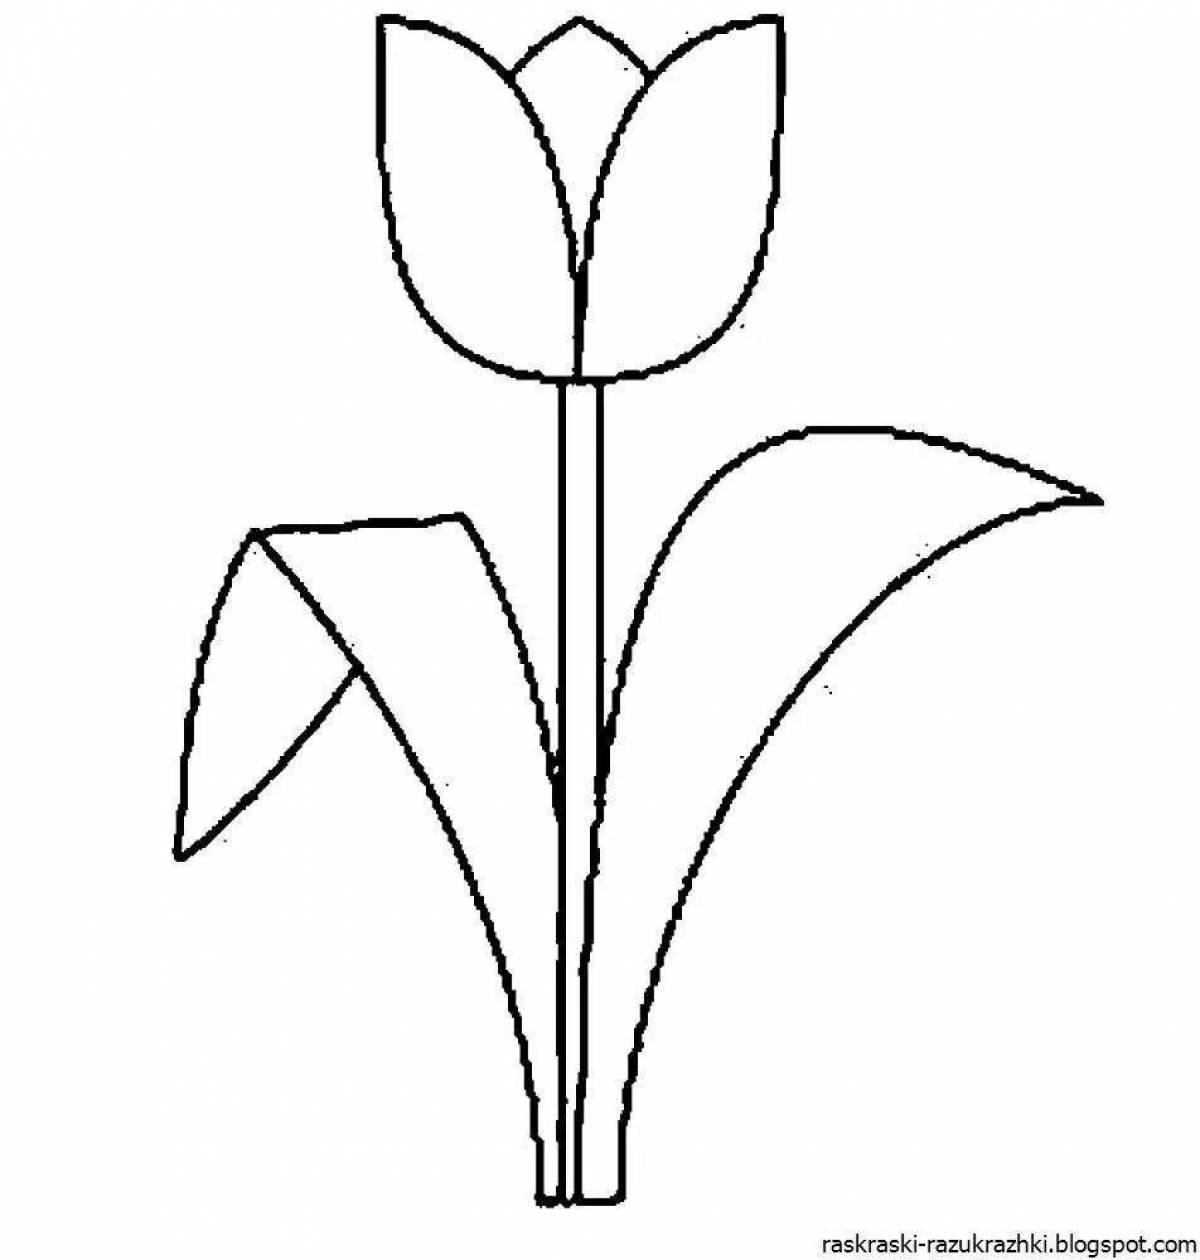 Coloring book shining tulip for children